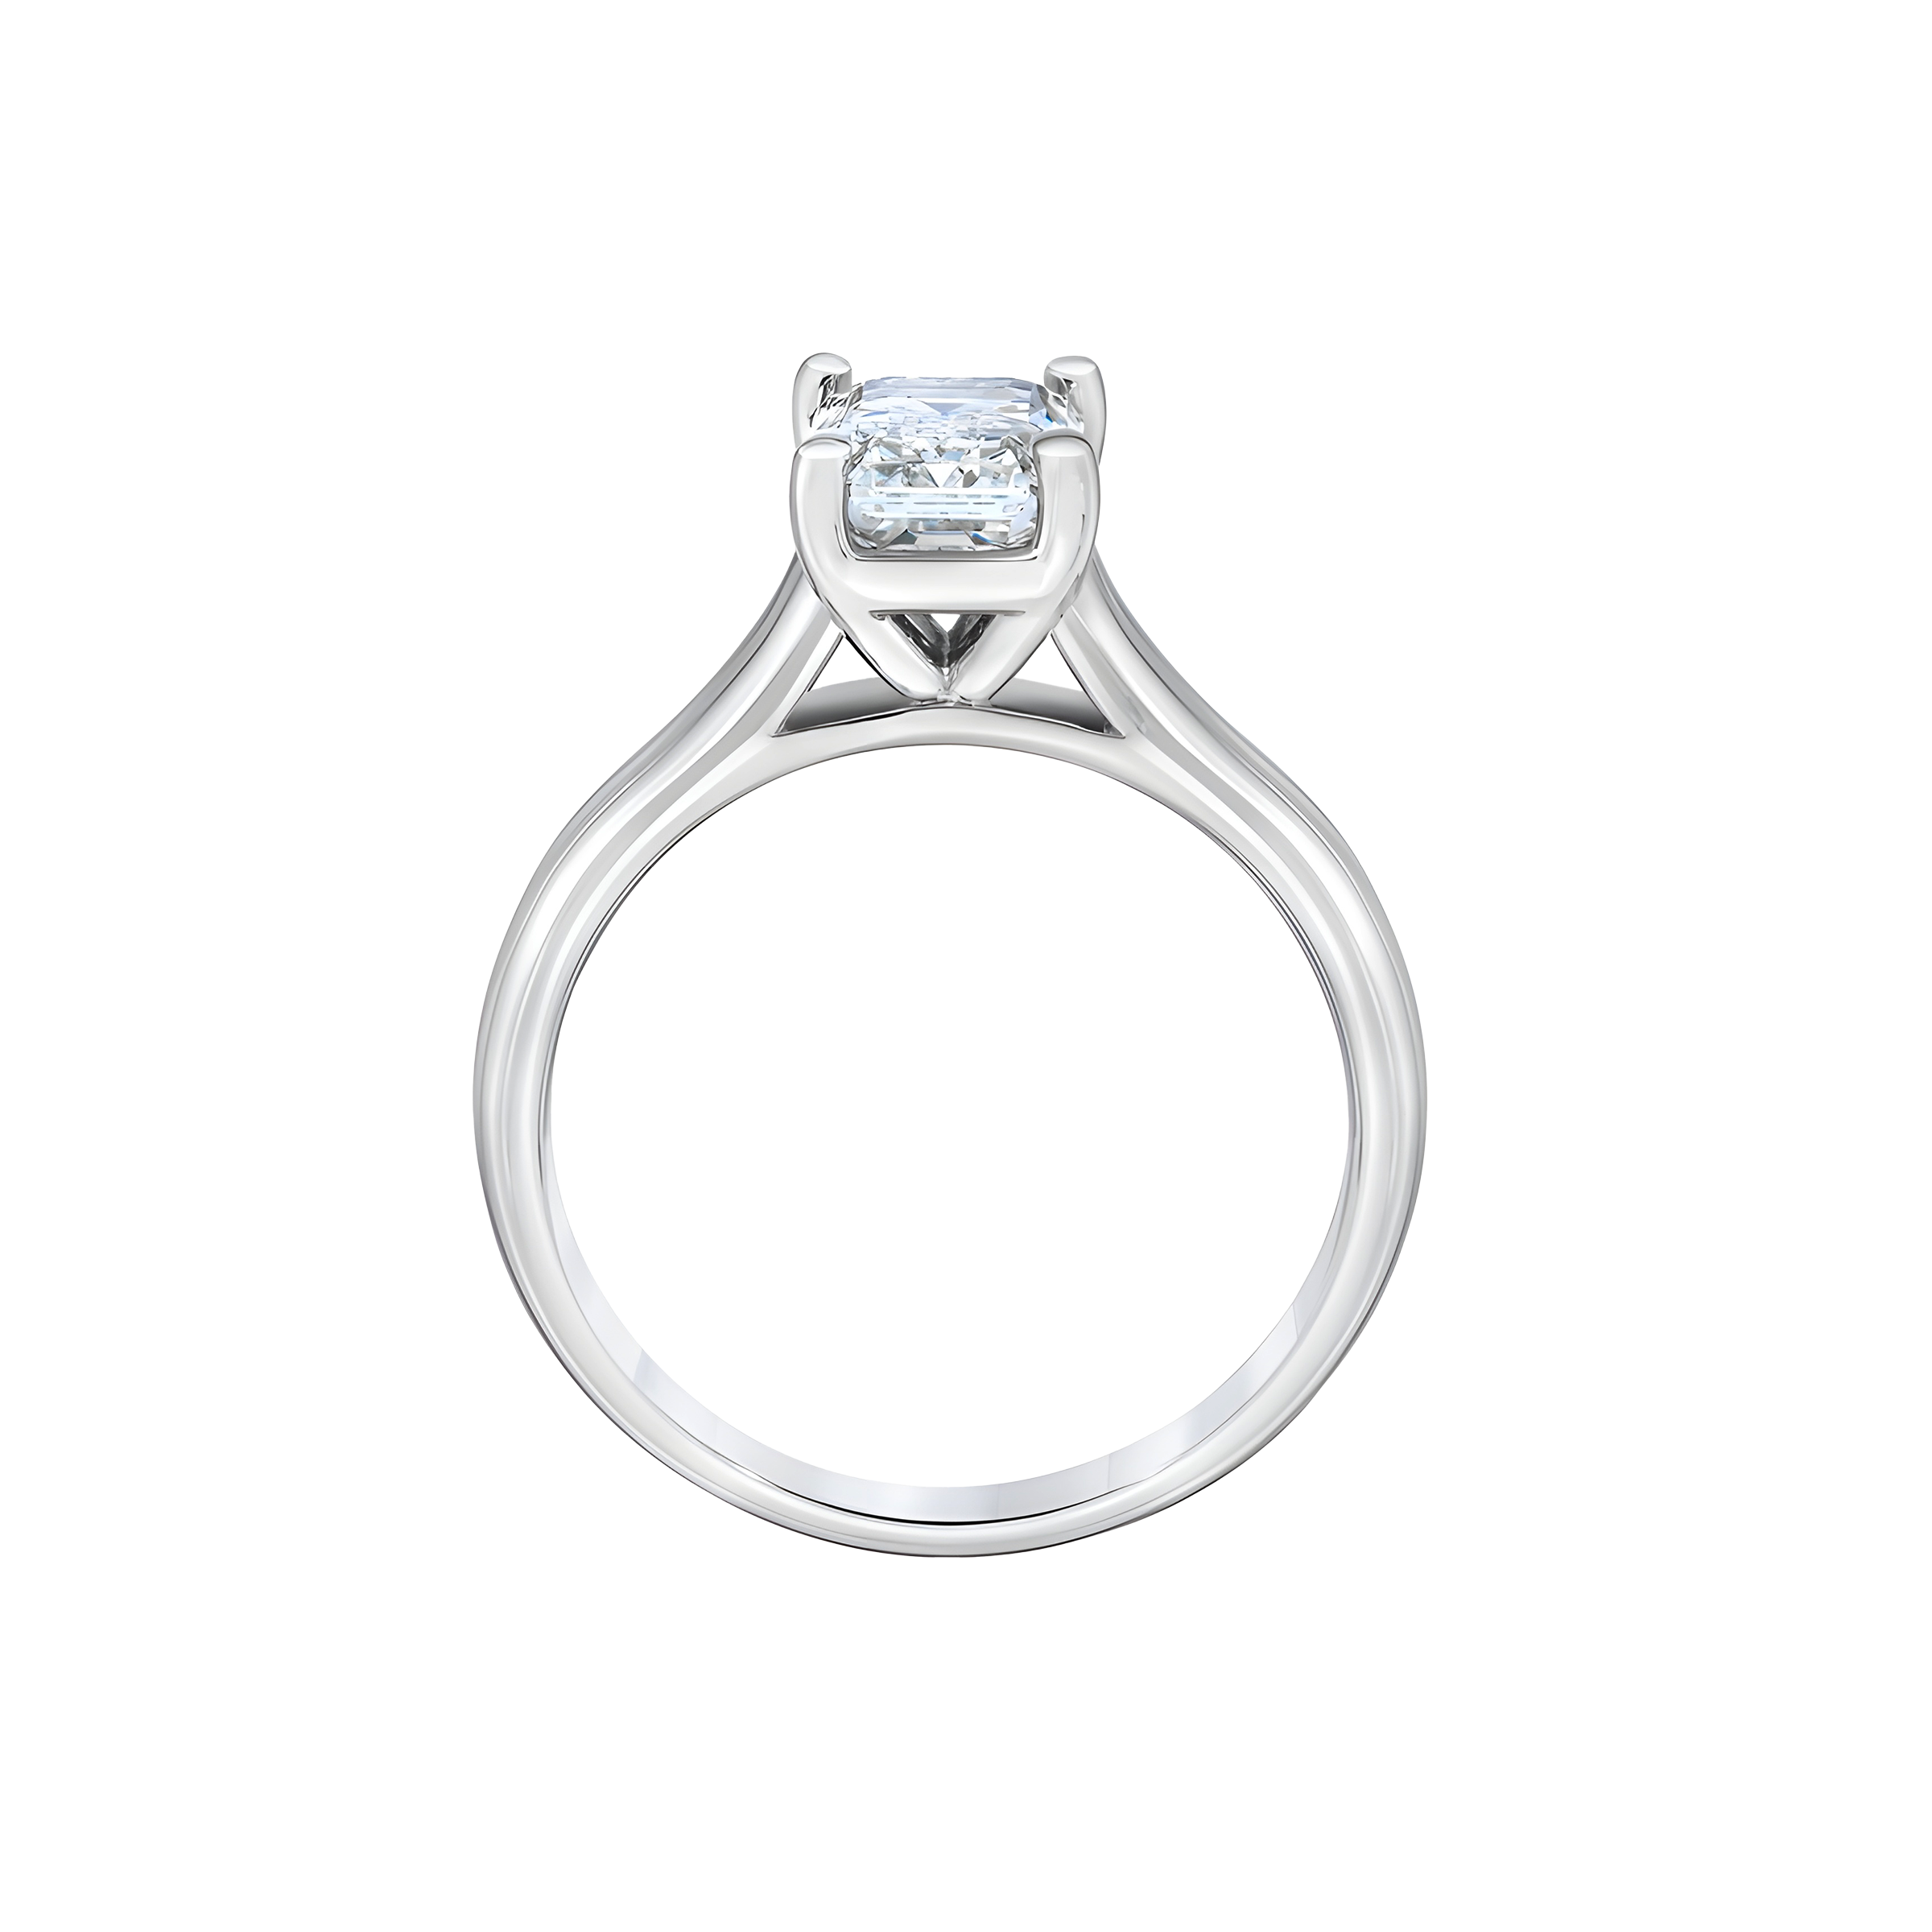 Emerald Cut Solitaire Diamond Engagement Ring in 18k White Gold